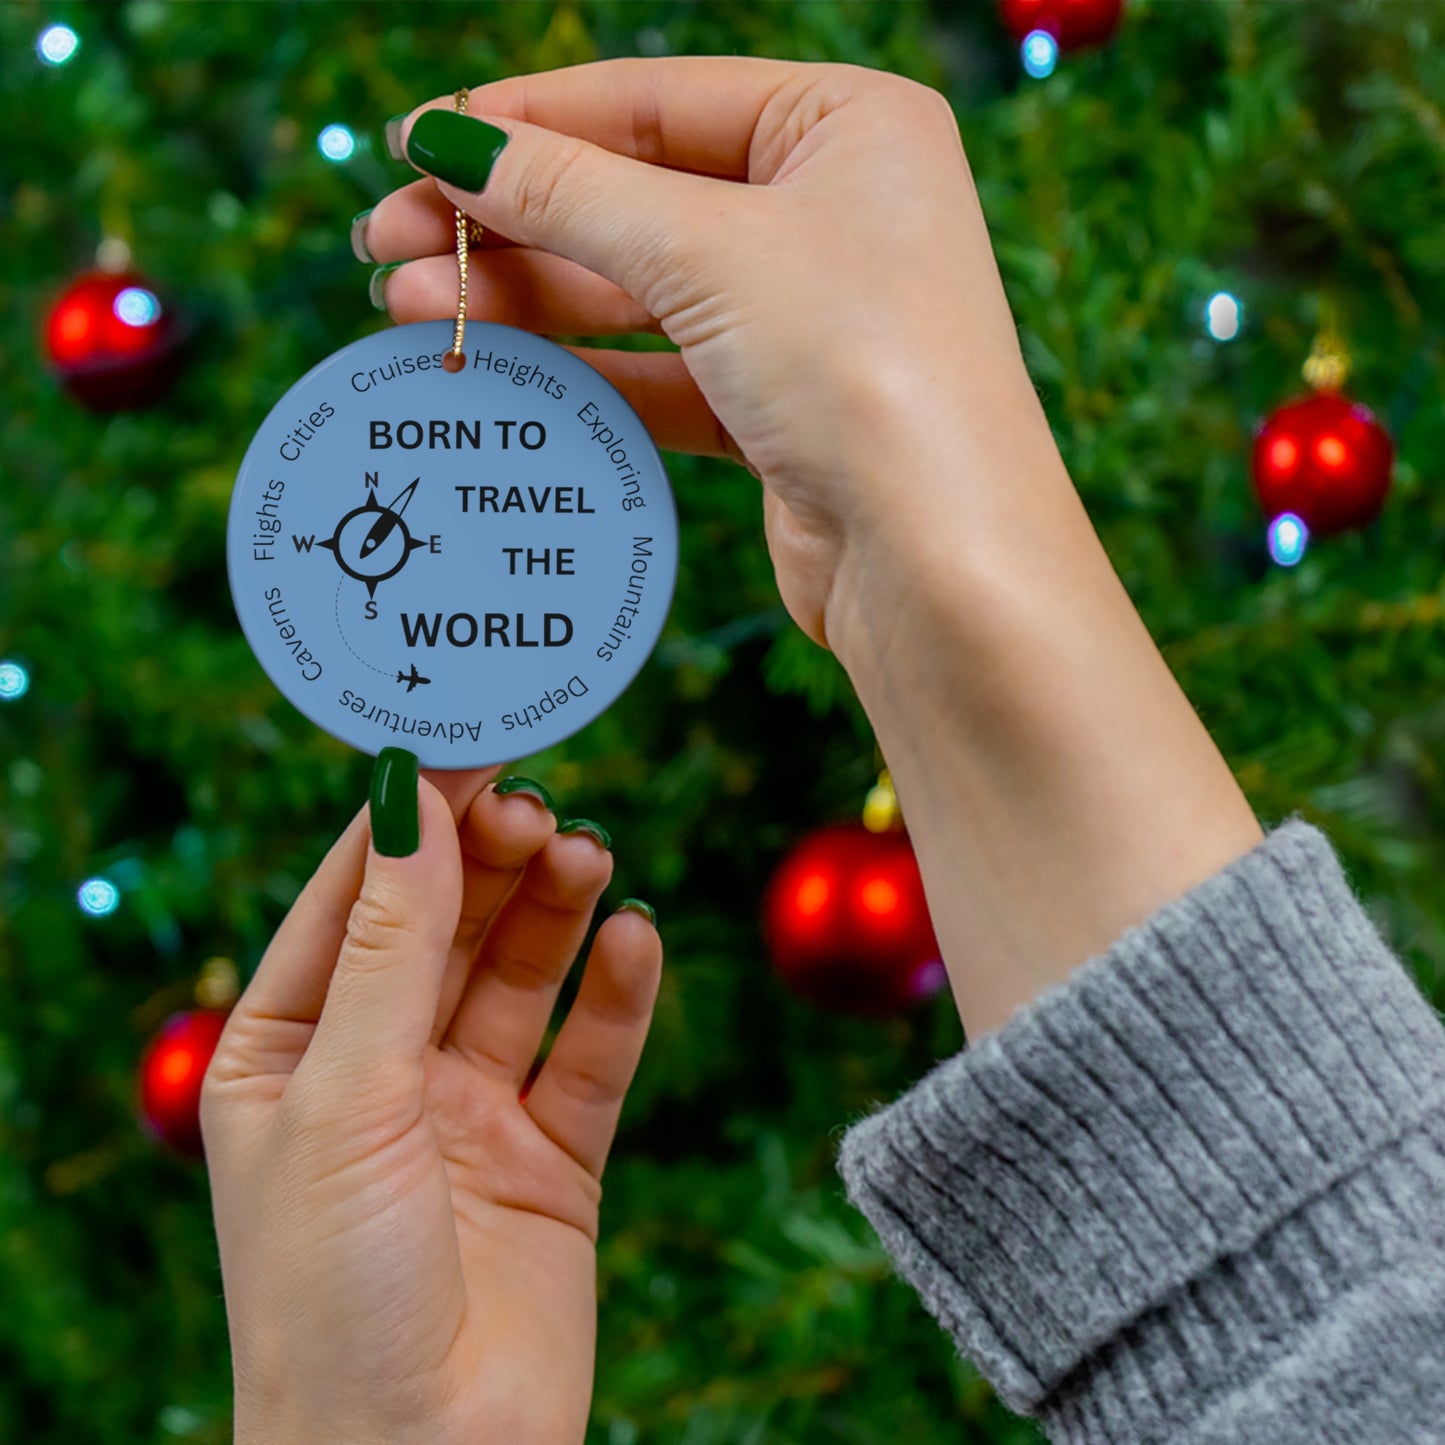 Travel The World Ornament - Ornament Gift For Those Who Love Travel, Express Your Wanderlust Through This Wonderful Ornament